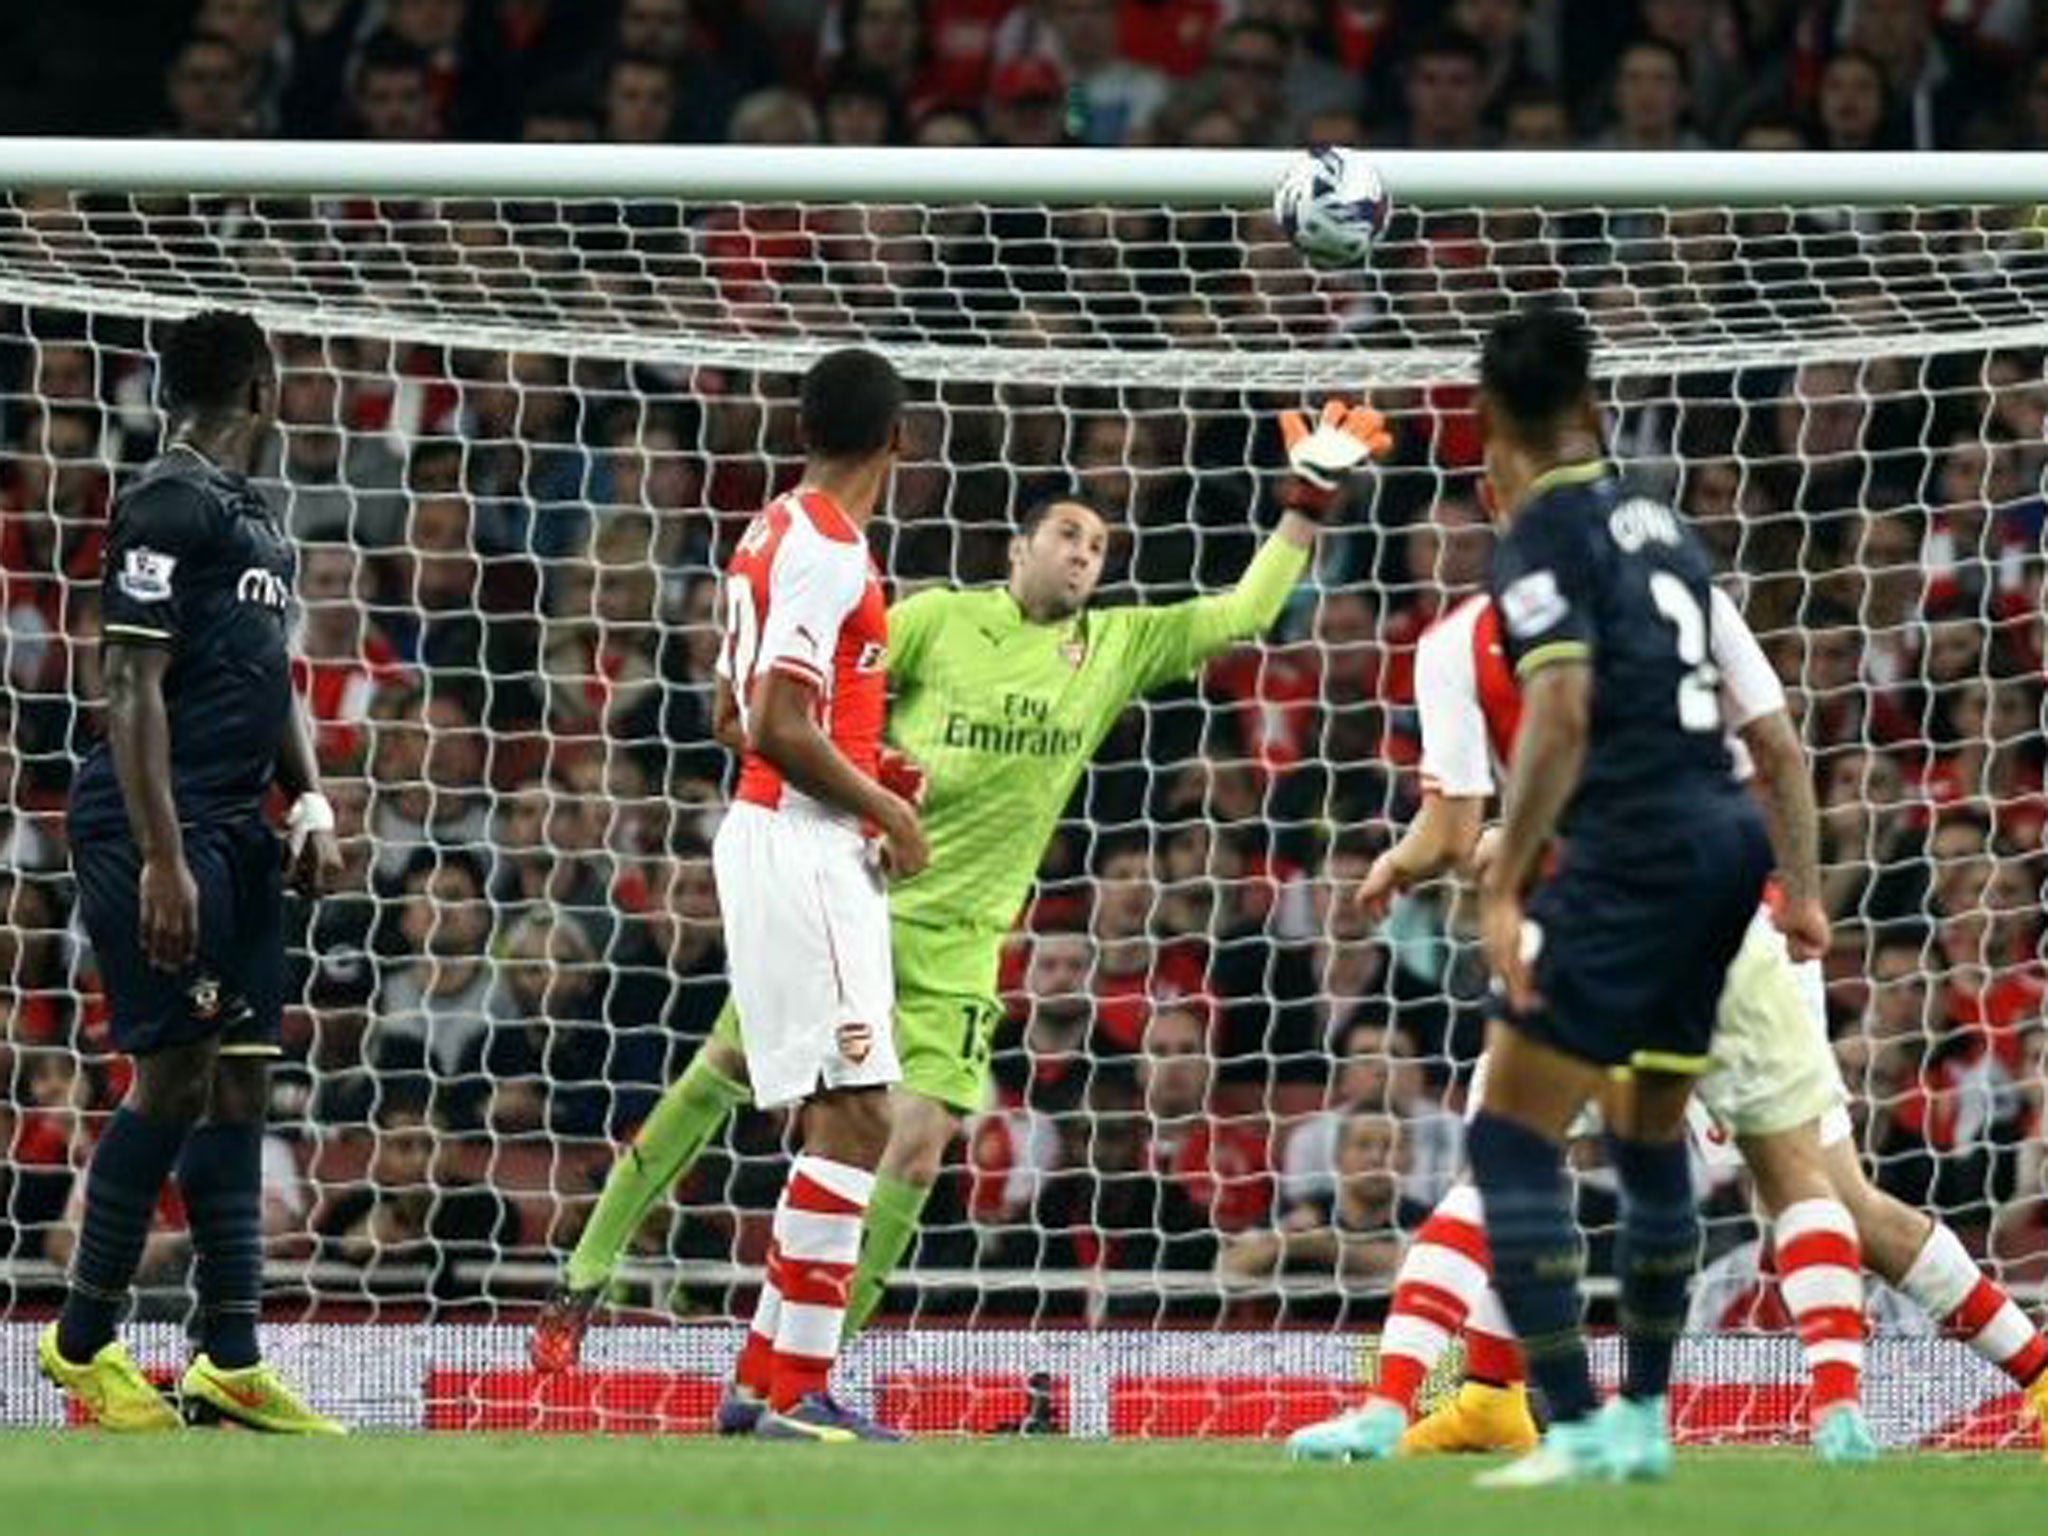 Nathaniel Clyne (No 2) drives home his side's second goal past Arsenal’s David Ospina at the Emirates